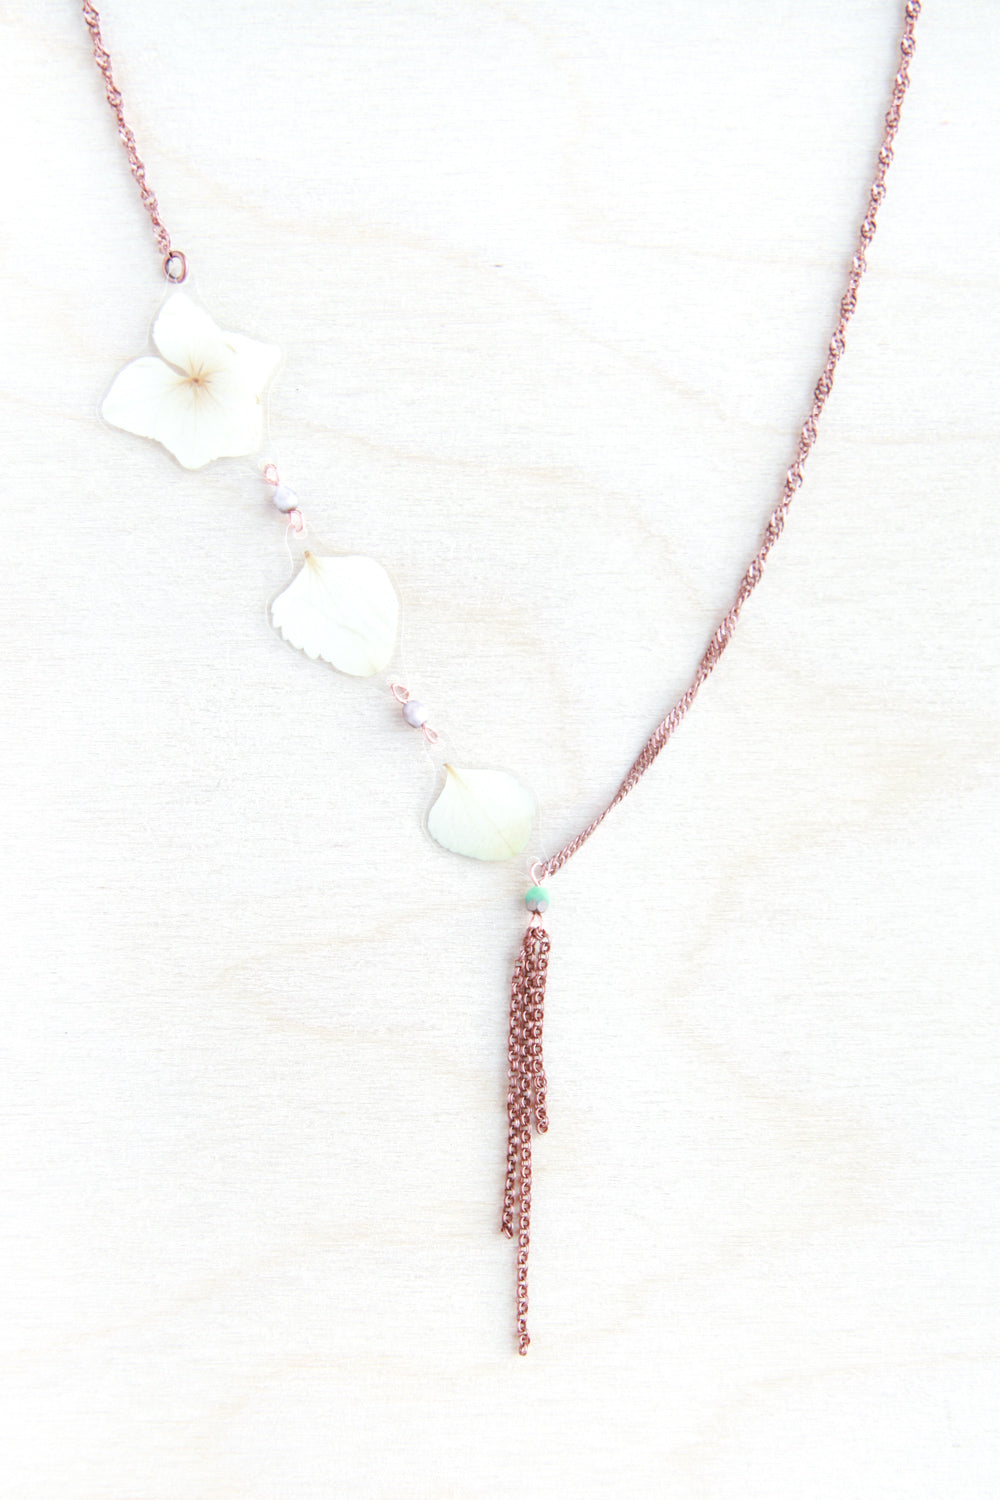 White Hydrangea Pressed Flower Necklace with Turquoise Glass Beads & Double Rolo Dangles